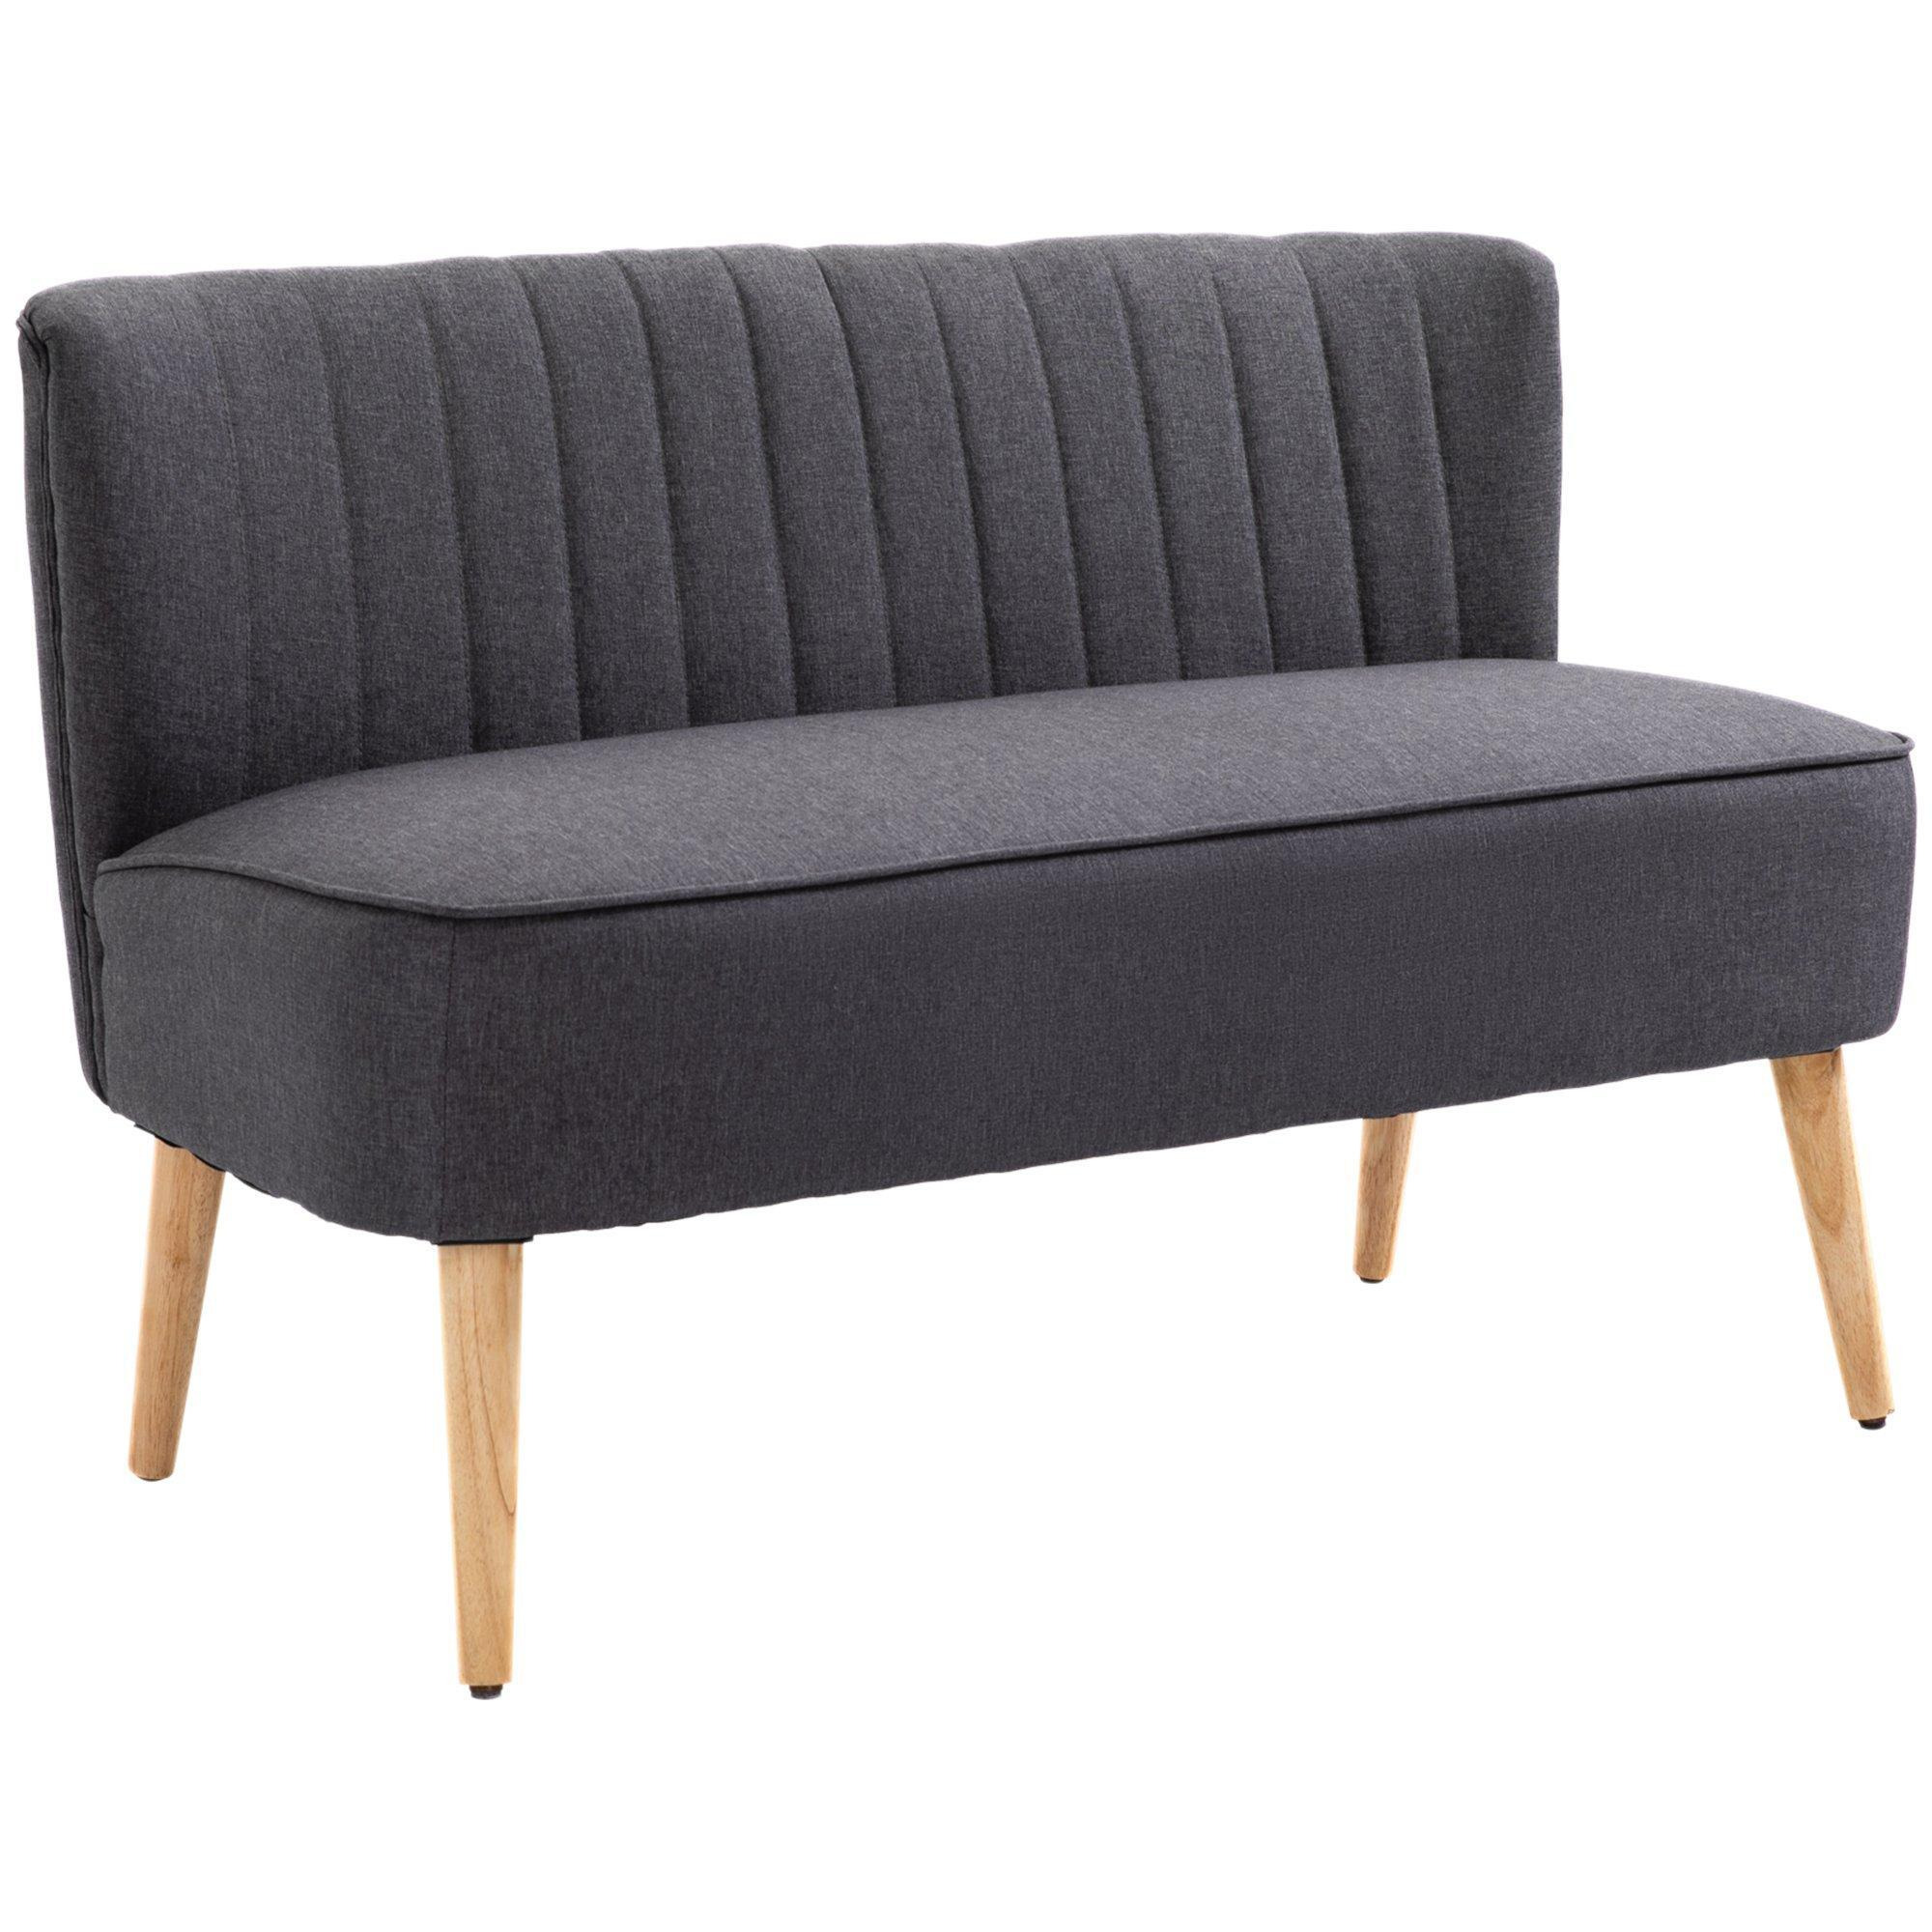 Modern Double Seat Sofa Compact Loveseat Couch Padded Wood Legs - image 1